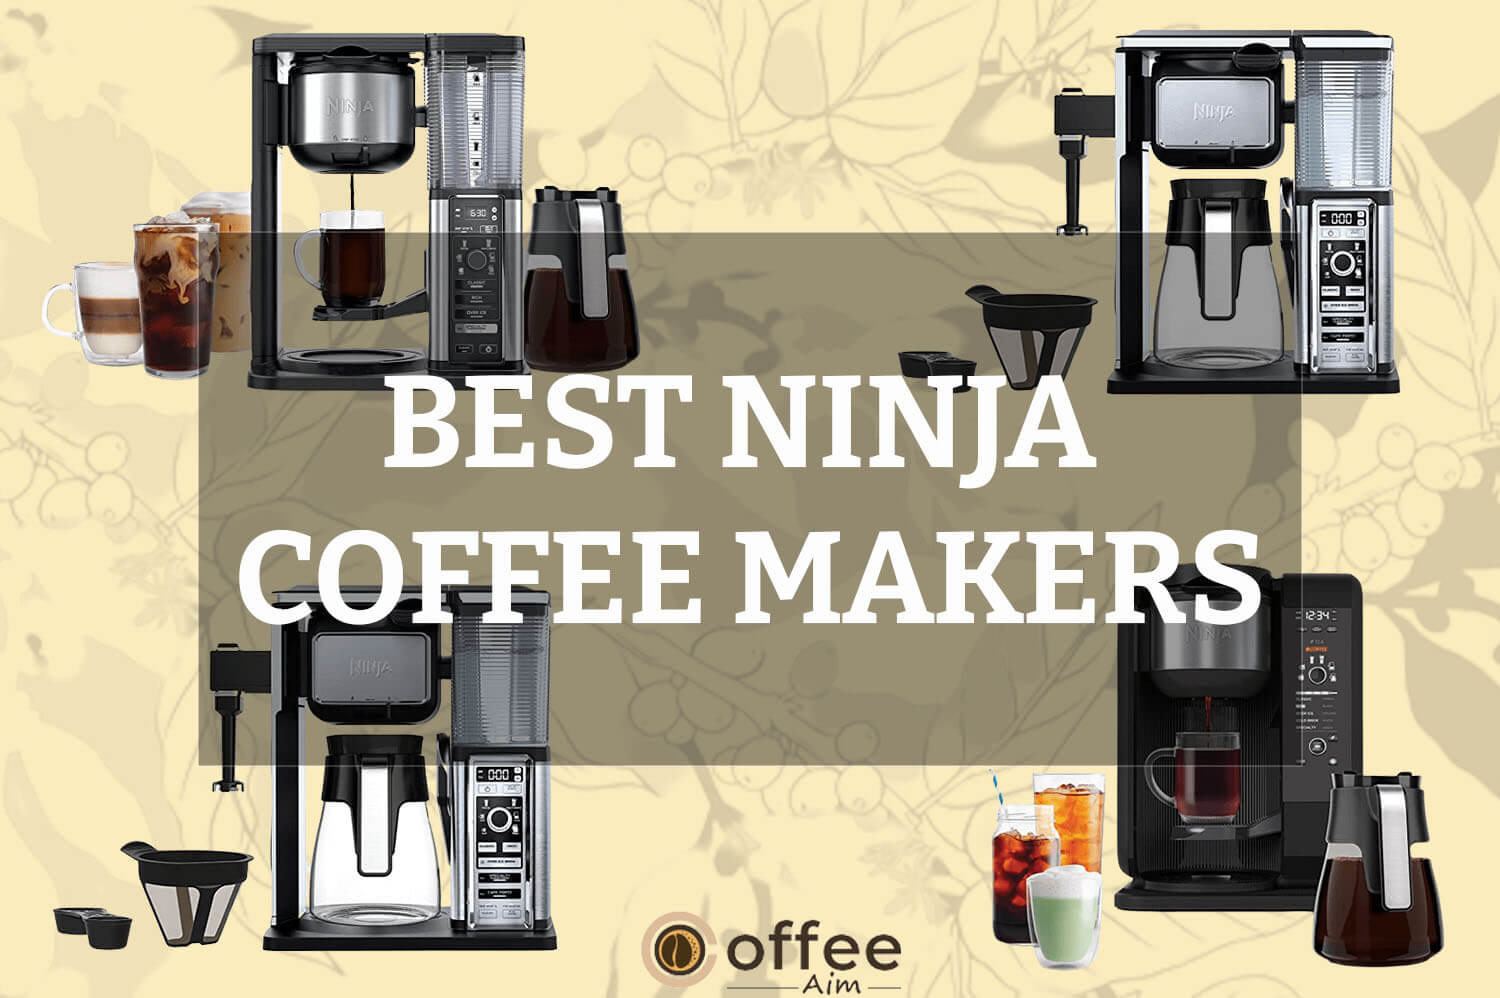 Featured image for the article "Best Ninja Coffee Makers"